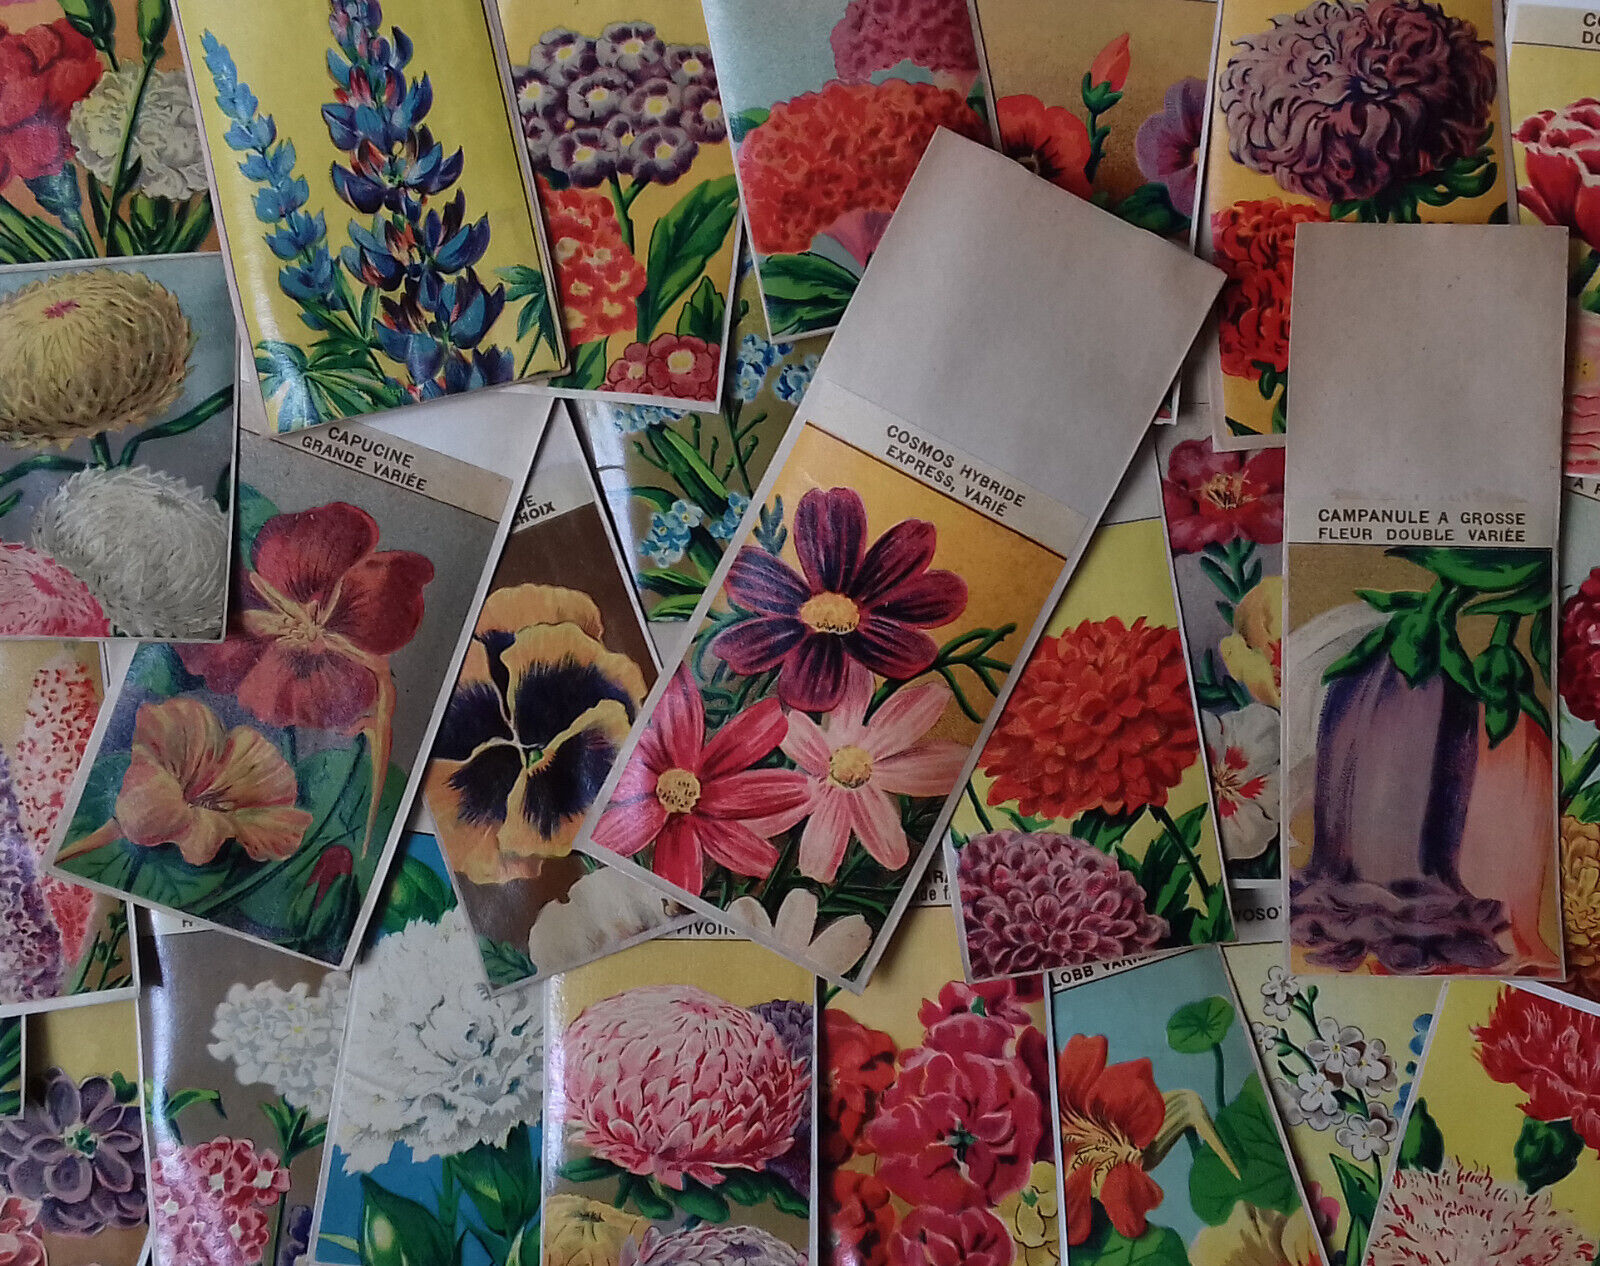 27 FLOWER Seed Packets vintage French all different